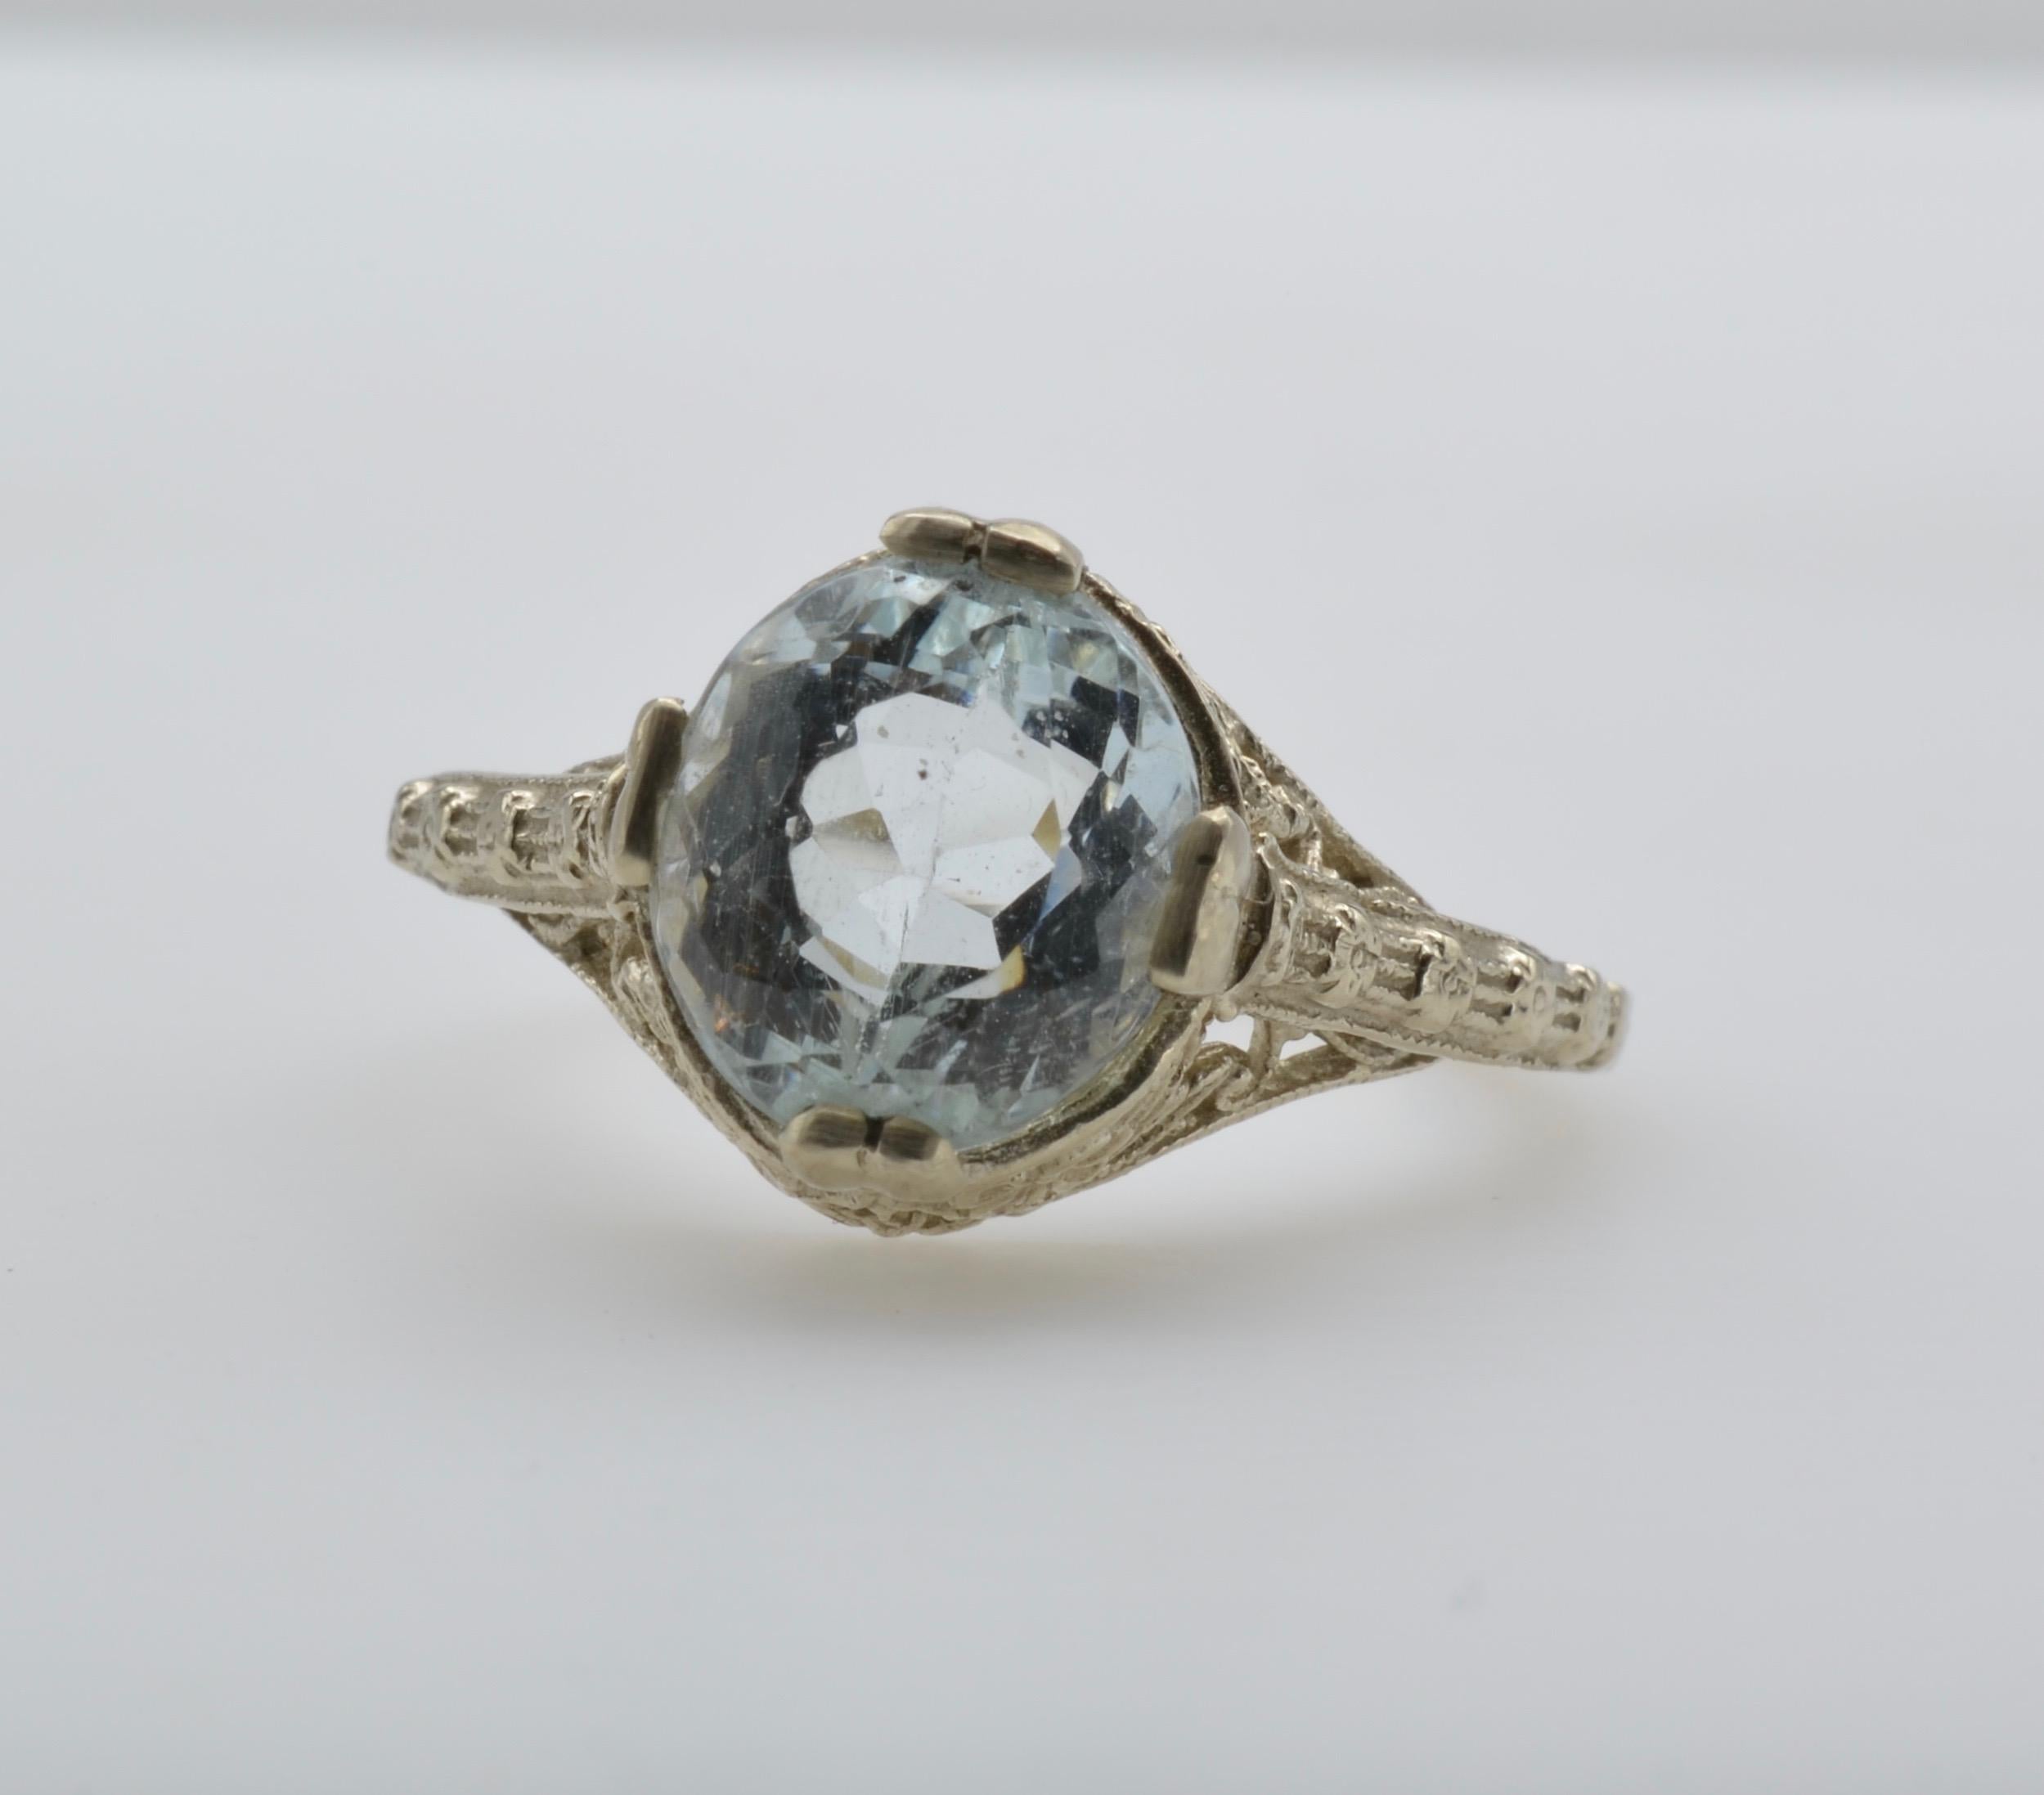 This lovely aquamarine ring is beautifully set in a engraved setting of 14k white gold. The dreamy blue aquamarine is beautifully cut to cast a dazzle in every direction. This stunner would make a wonderful engagement ring for the diamond